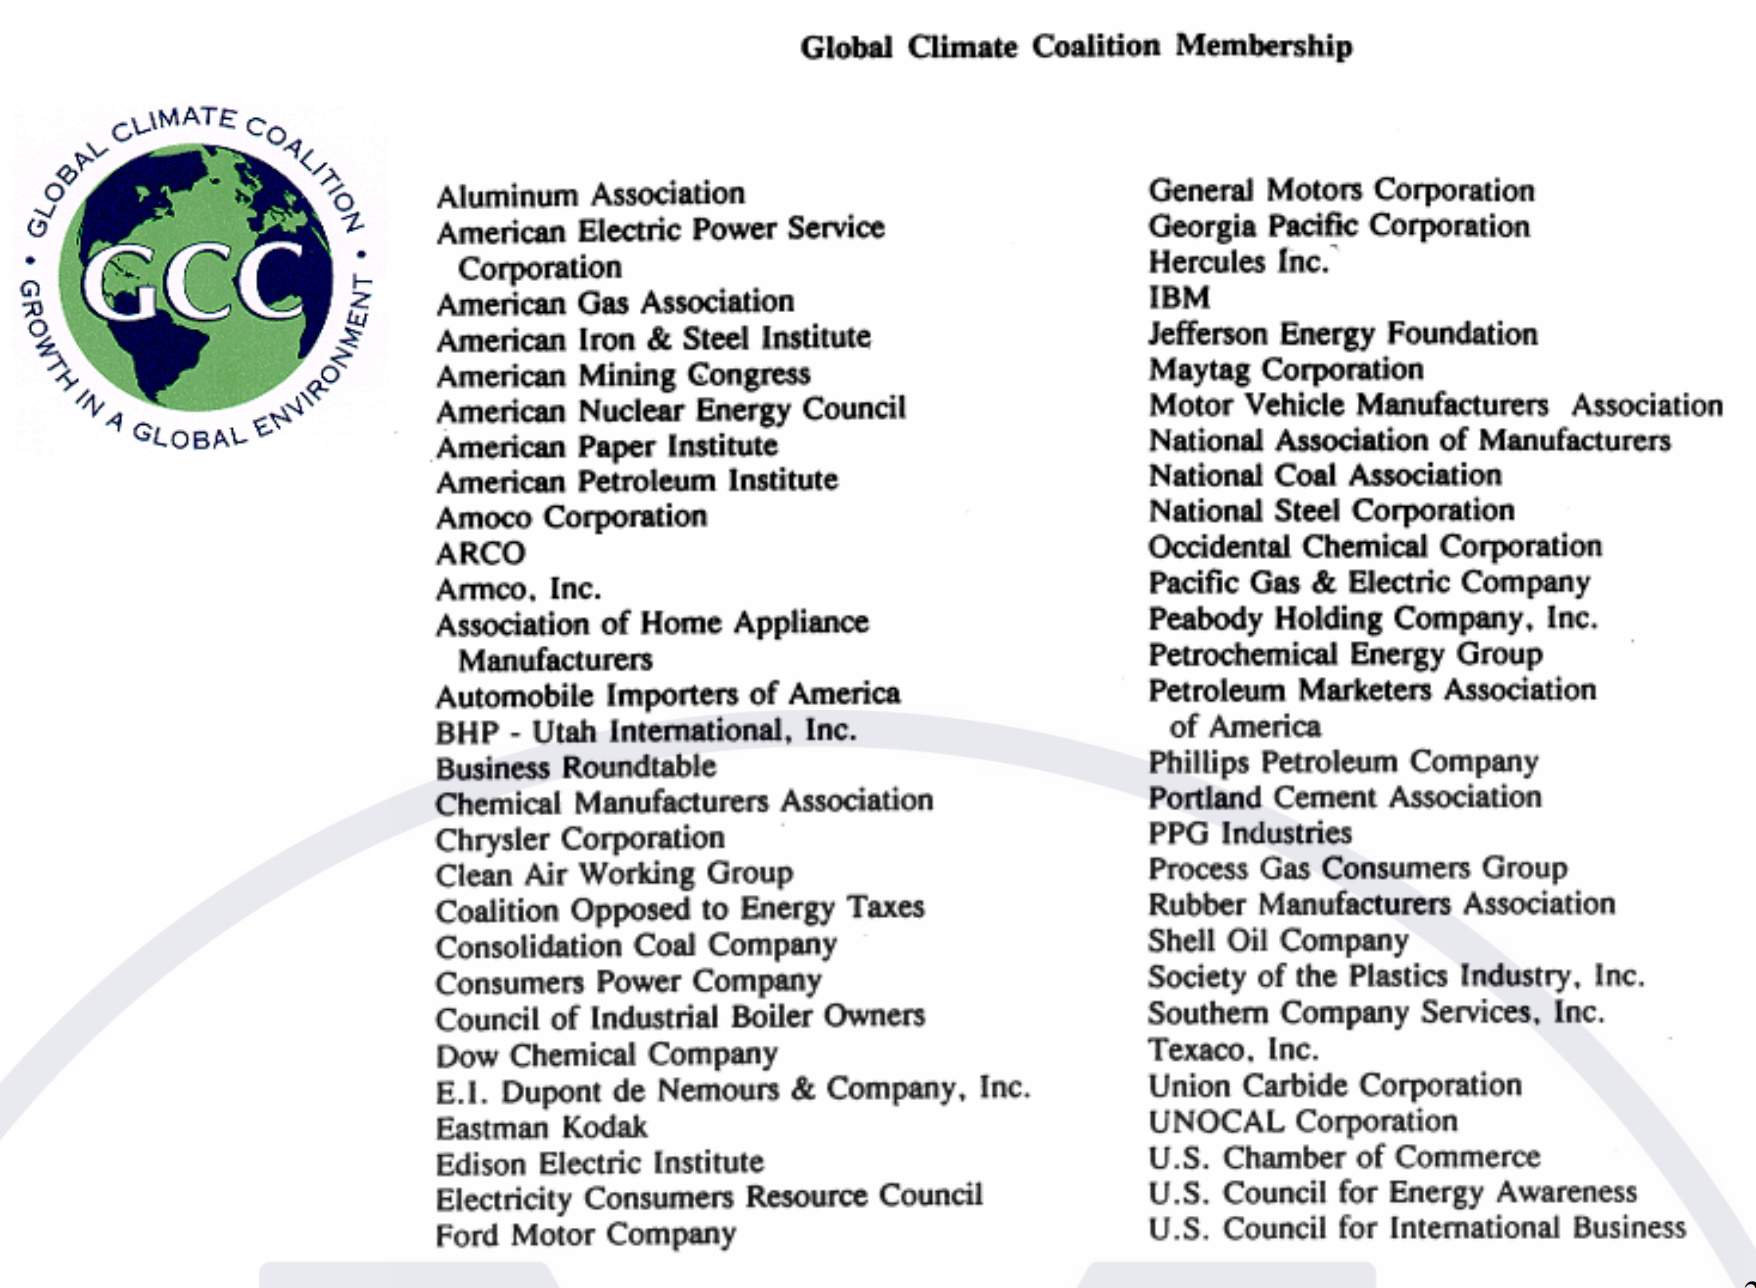 List of member companies in the Global Climate Coalition (GCC), which funded advertising campaigns and distributed material to misinform the public about climate change, with the specific purpose of preventing U.S. adoption of the Kyoto Protocol, an international treaty which extends the 1992 United Nations Framework Convention on Climate Change (UNFCCC) that commits state parties to reduce greenhouse gas emissions, based on the scientific consensus that global warming is occurring, despite the leading role that the U.S. had played in the Protocol negotiations. Graphic: Municipalities of Puerto Rico v. Fossil Fuel Companies 3:22-cv-01550